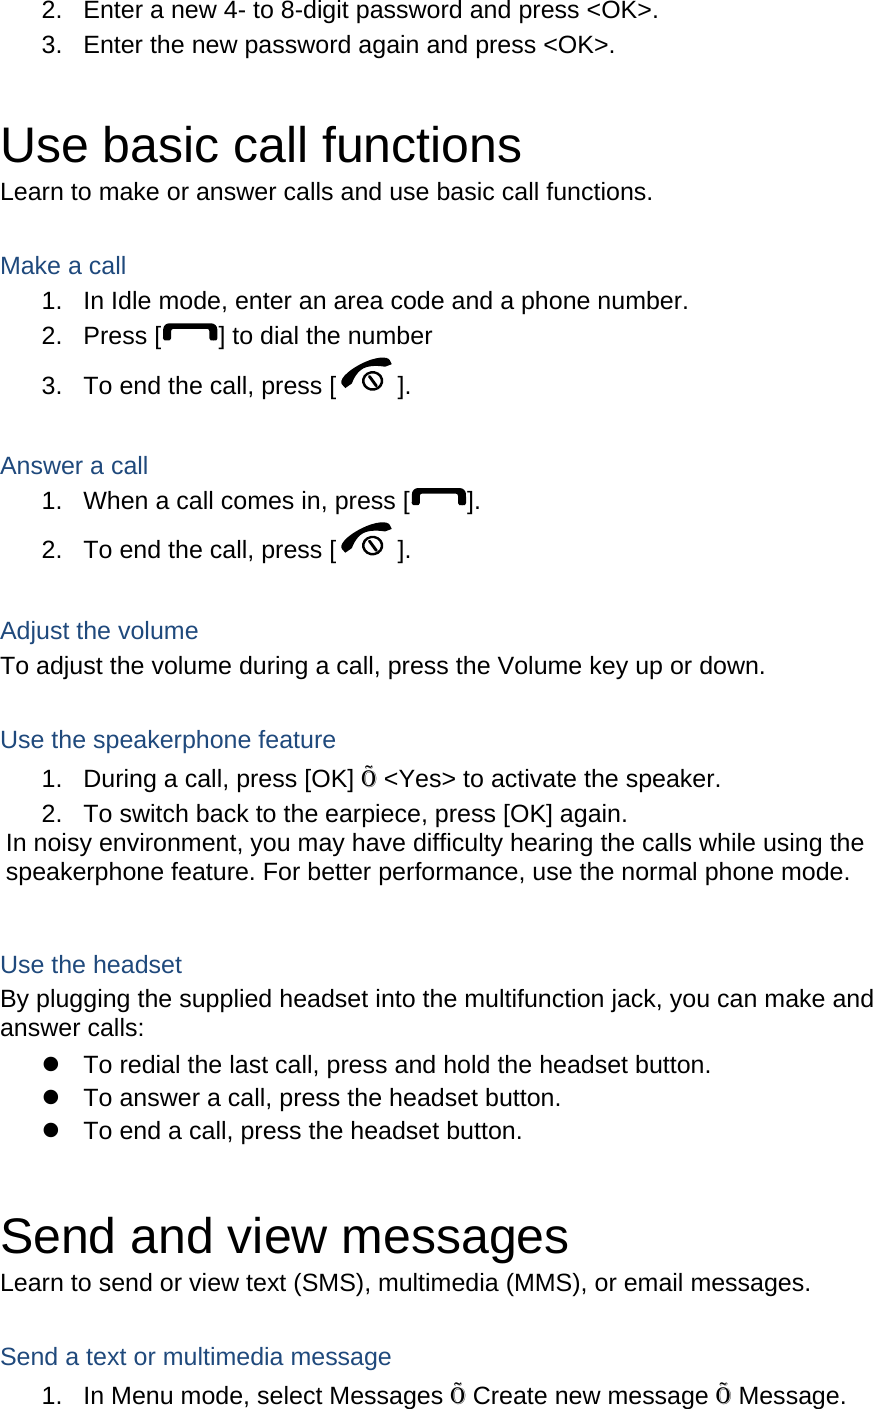 2.  Enter a new 4- to 8-digit password and press &lt;OK&gt;. 3.  Enter the new password again and press &lt;OK&gt;.  Use basic call functions Learn to make or answer calls and use basic call functions.  Make a call 1.  In Idle mode, enter an area code and a phone number. 2. Press [ ] to dial the number 3.  To end the call, press [ ].   Answer a call 1.  When a call comes in, press [ ]. 2.  To end the call, press [ ].  Adjust the volume To adjust the volume during a call, press the Volume key up or down.  Use the speakerphone feature 1.  During a call, press [OK] Õ &lt;Yes&gt; to activate the speaker. 2.  To switch back to the earpiece, press [OK] again. In noisy environment, you may have difficulty hearing the calls while using the speakerphone feature. For better performance, use the normal phone mode.  Use the headset By plugging the supplied headset into the multifunction jack, you can make and answer calls: z  To redial the last call, press and hold the headset button. z  To answer a call, press the headset button. z  To end a call, press the headset button.  Send and view messages Learn to send or view text (SMS), multimedia (MMS), or email messages.  Send a text or multimedia message 1.  In Menu mode, select Messages Õ Create new message Õ Message. 